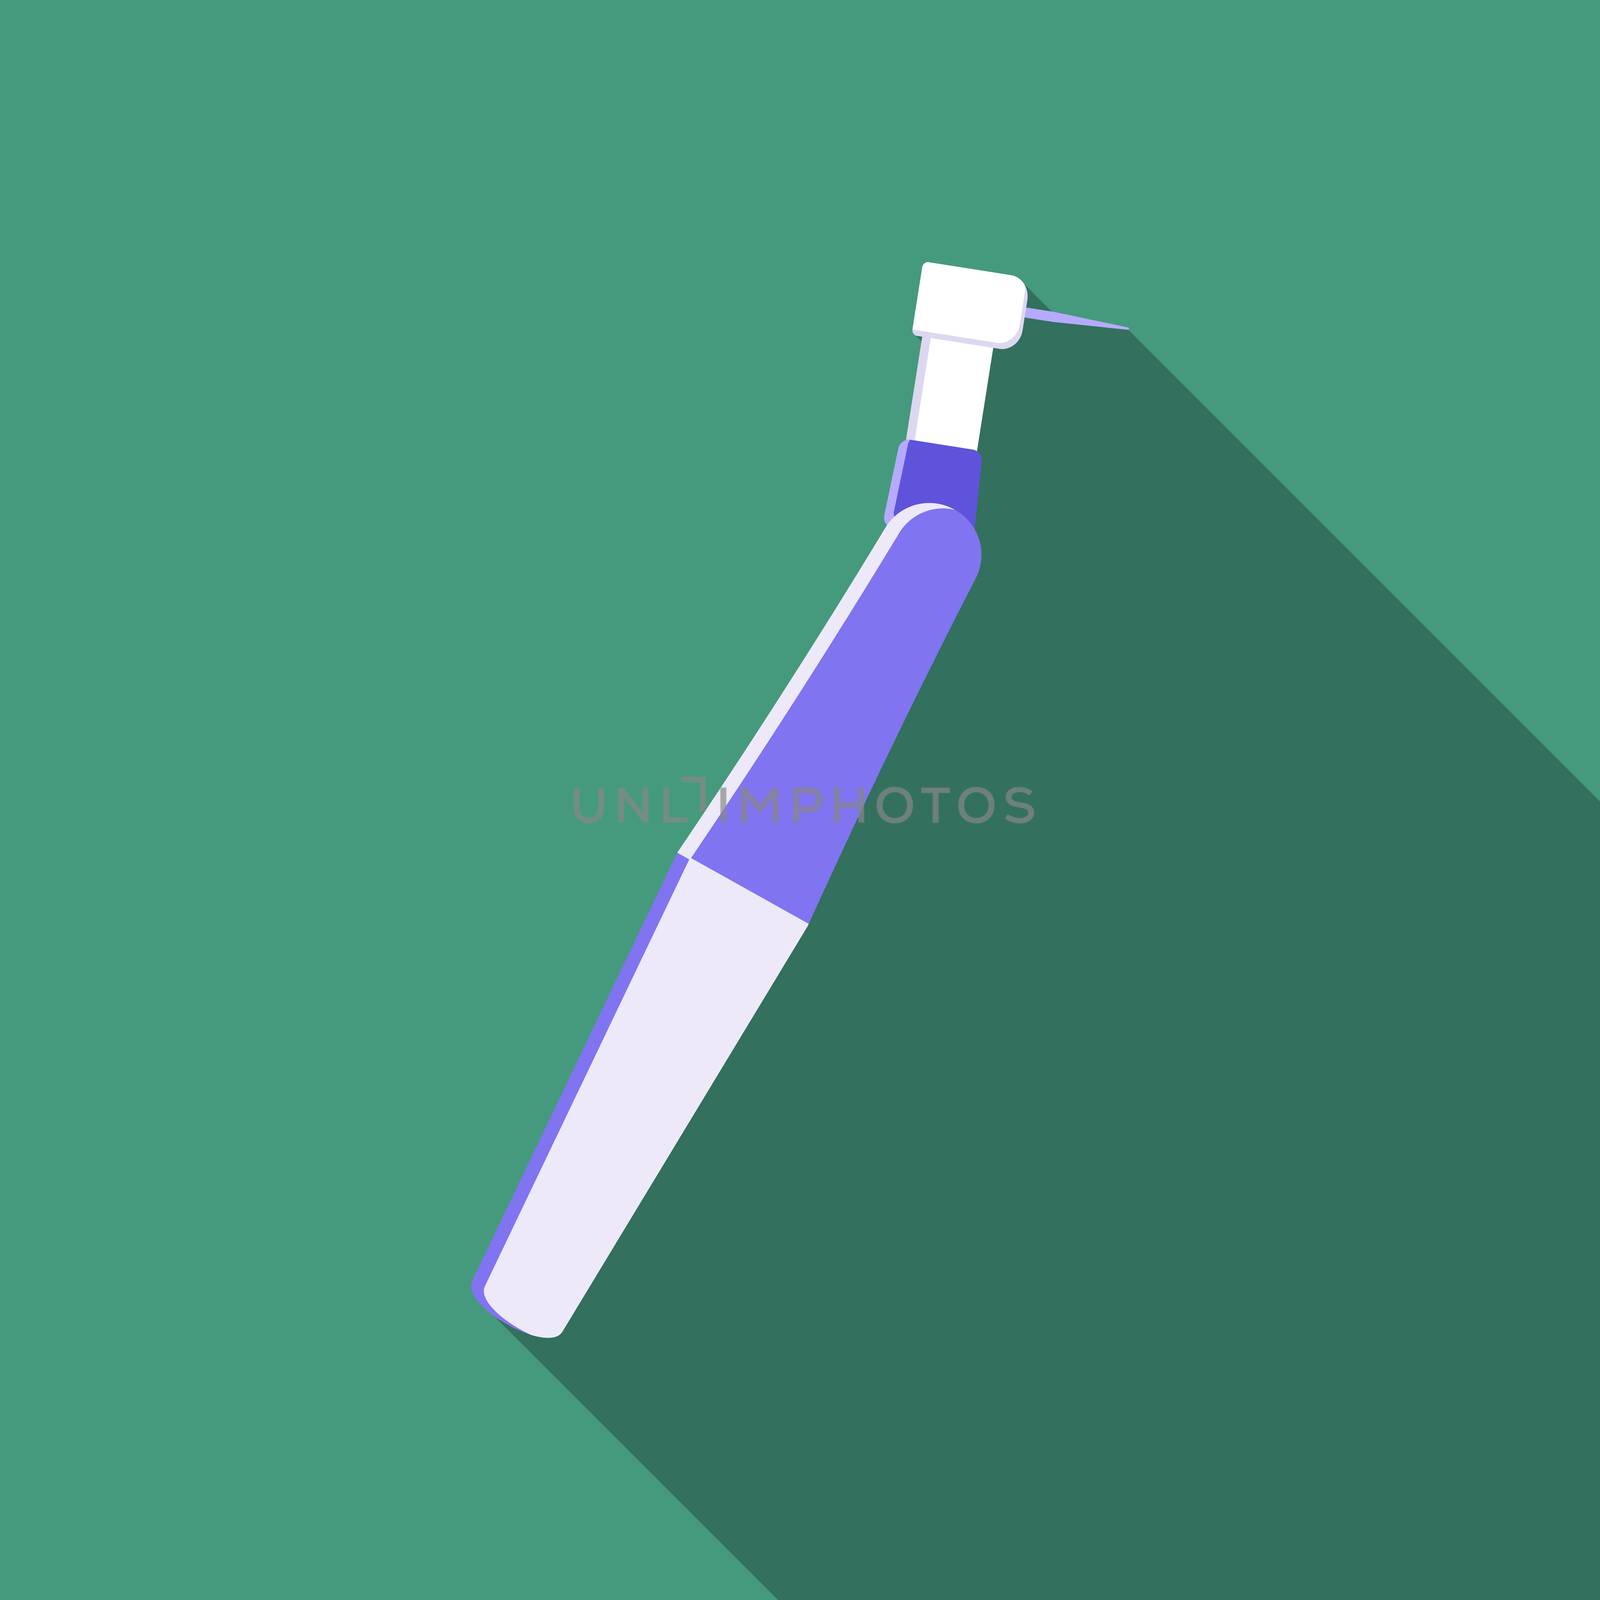 Flat design modern vector illustration of medical dental drill icon with long shadow by Lemon_workshop